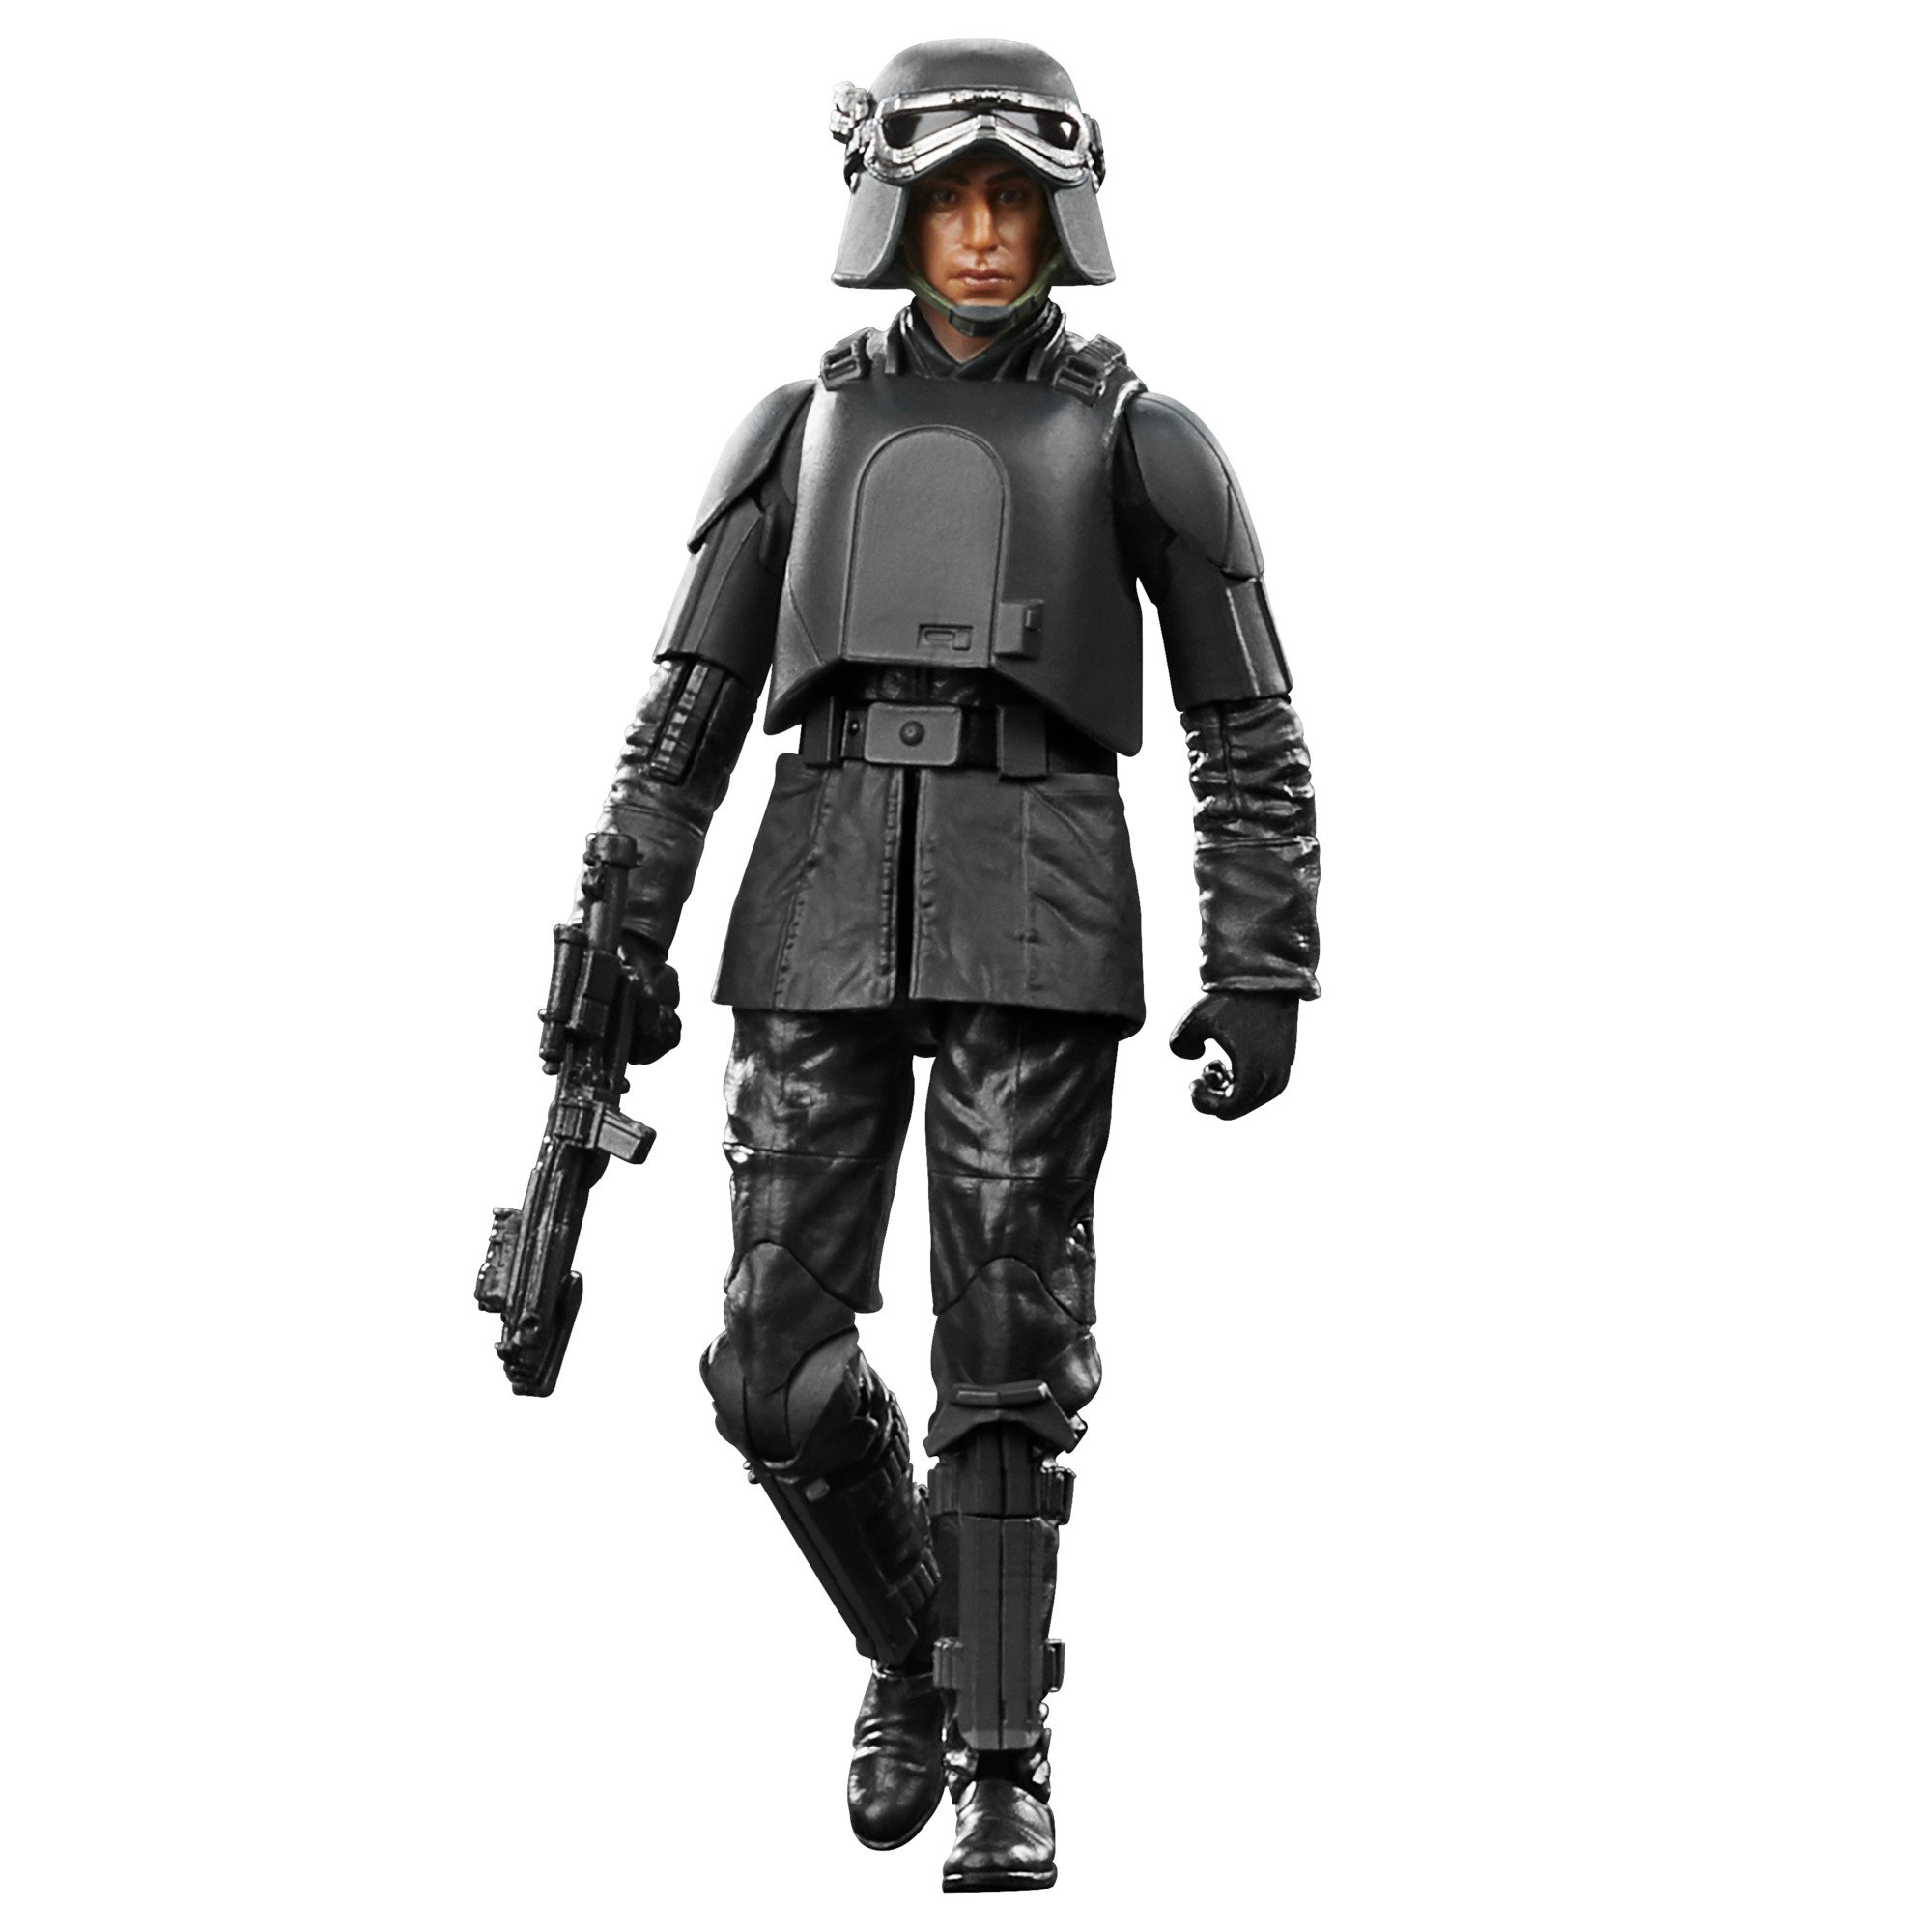 Hasbro Reveals Four New Black Series Figures From 'Andor' Star Wars